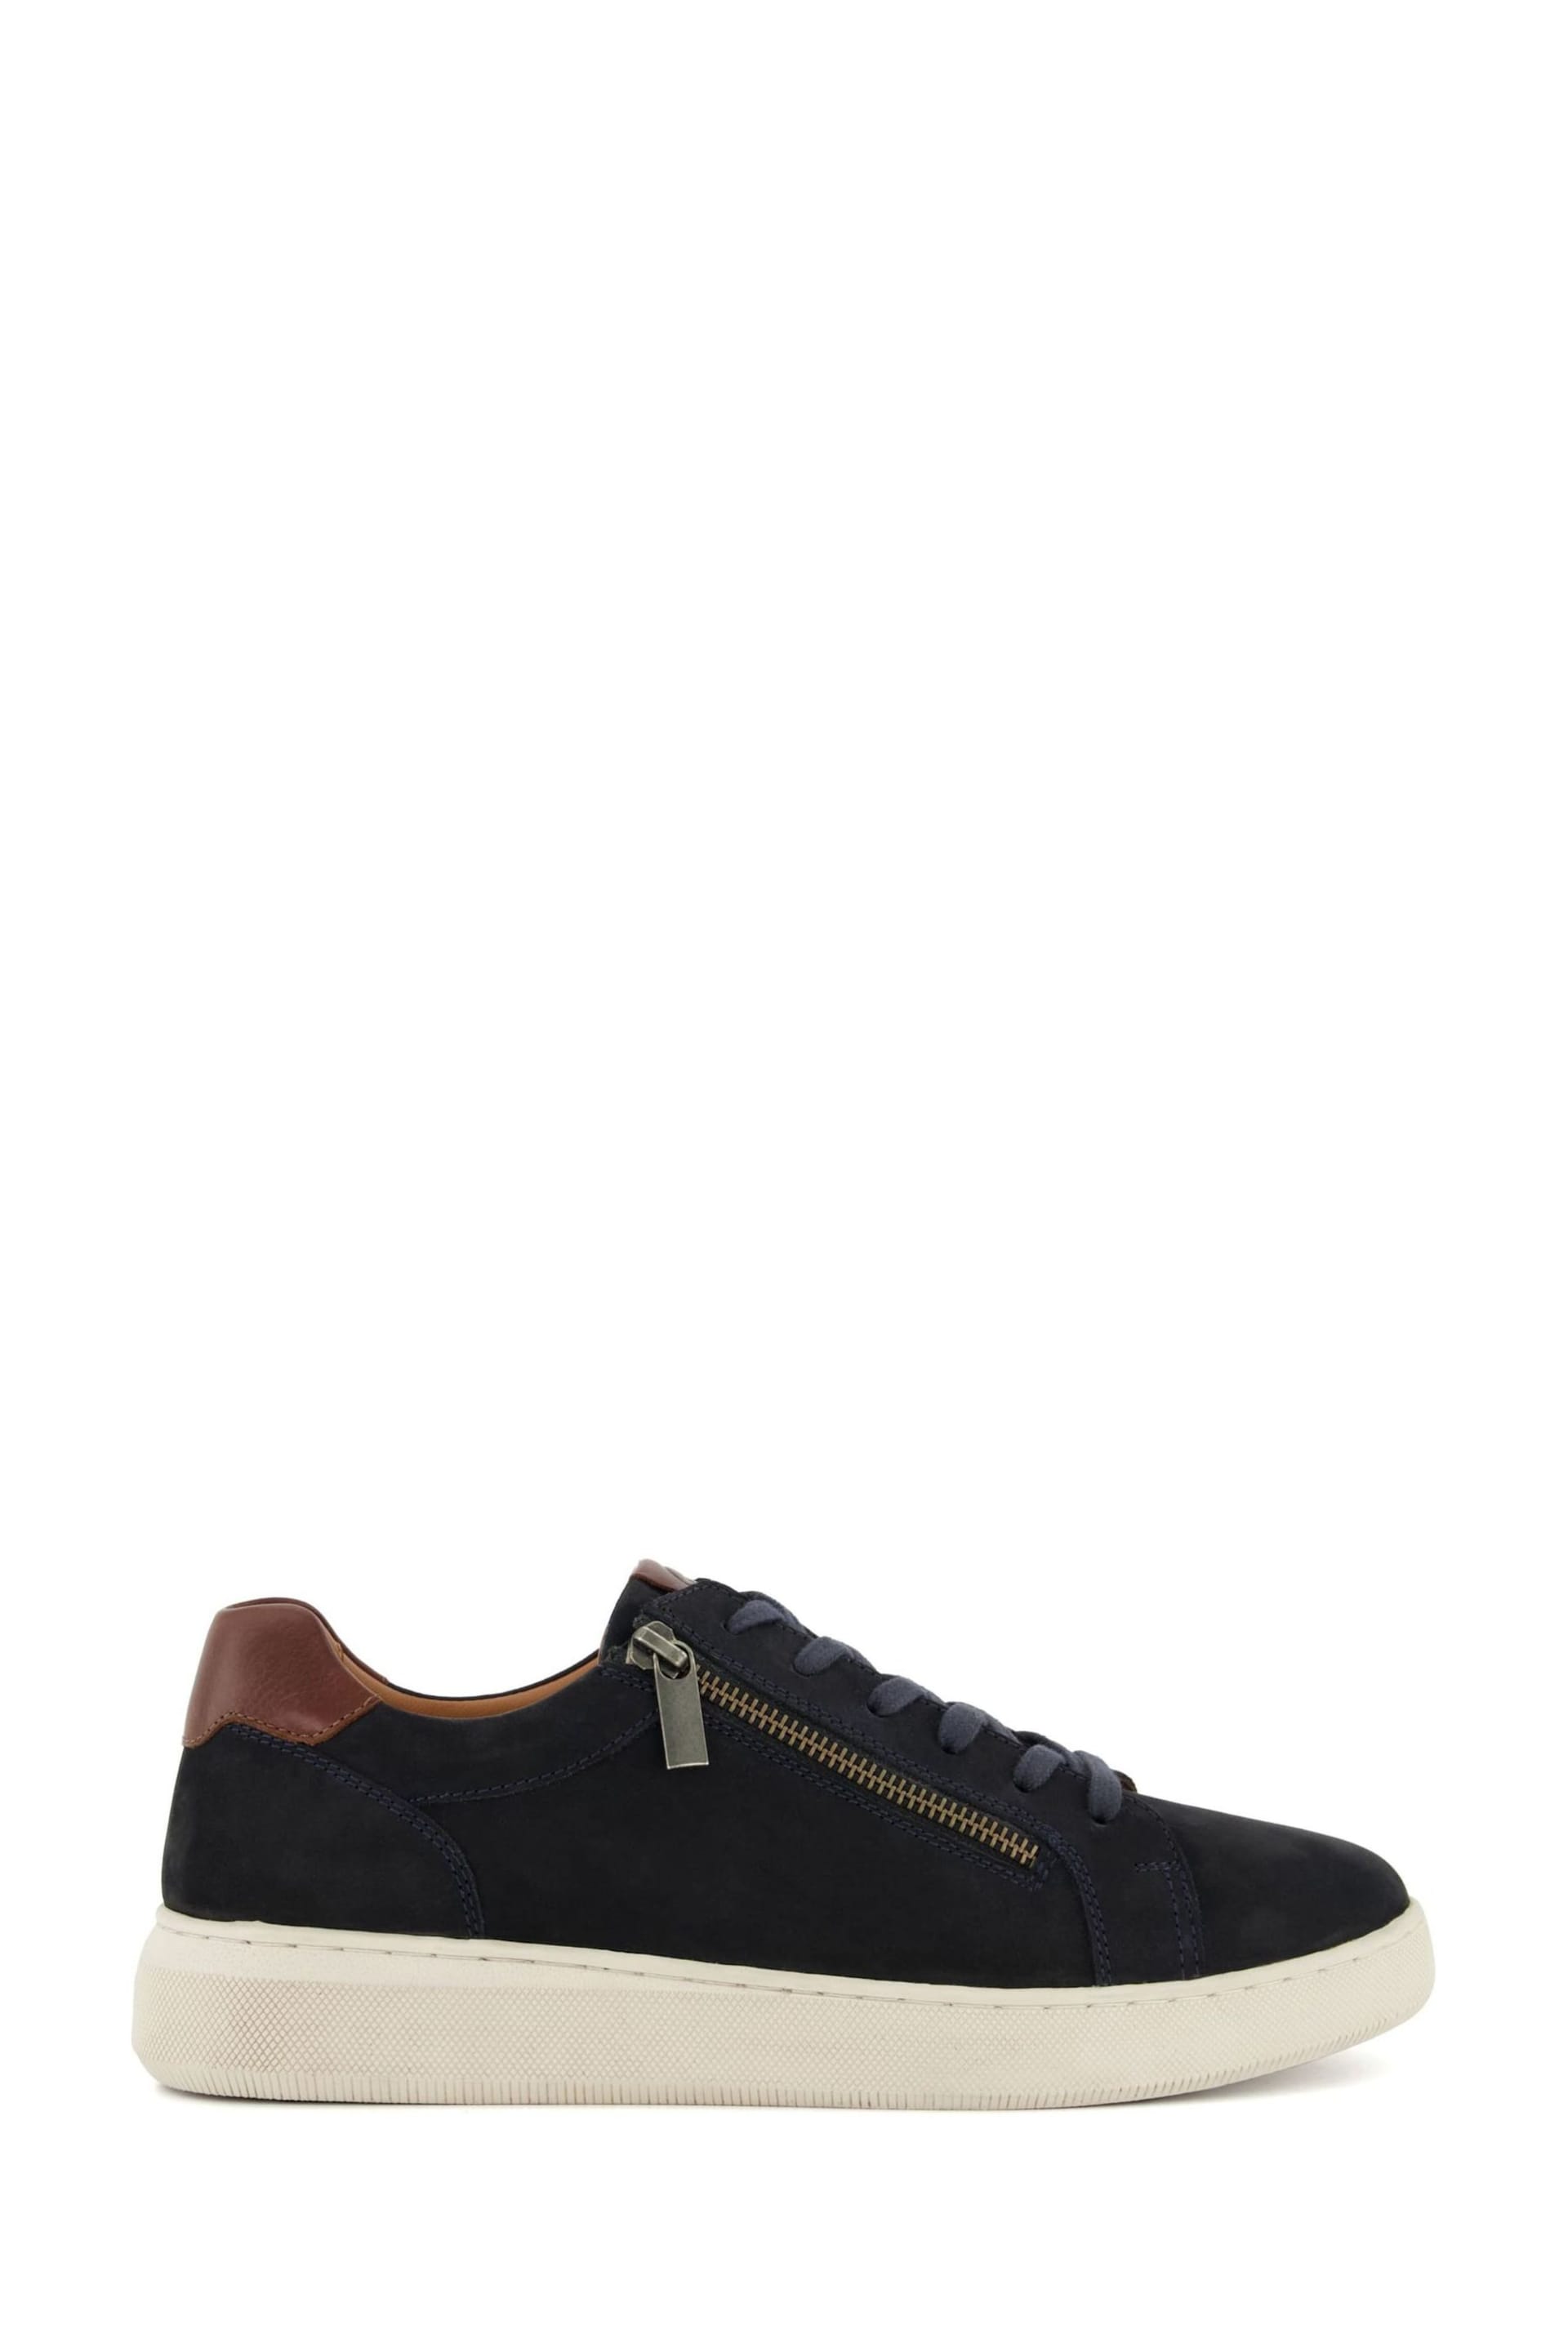 Dune London Blue Tribute Zip Detail Cupsole Trainers - Image 1 of 6